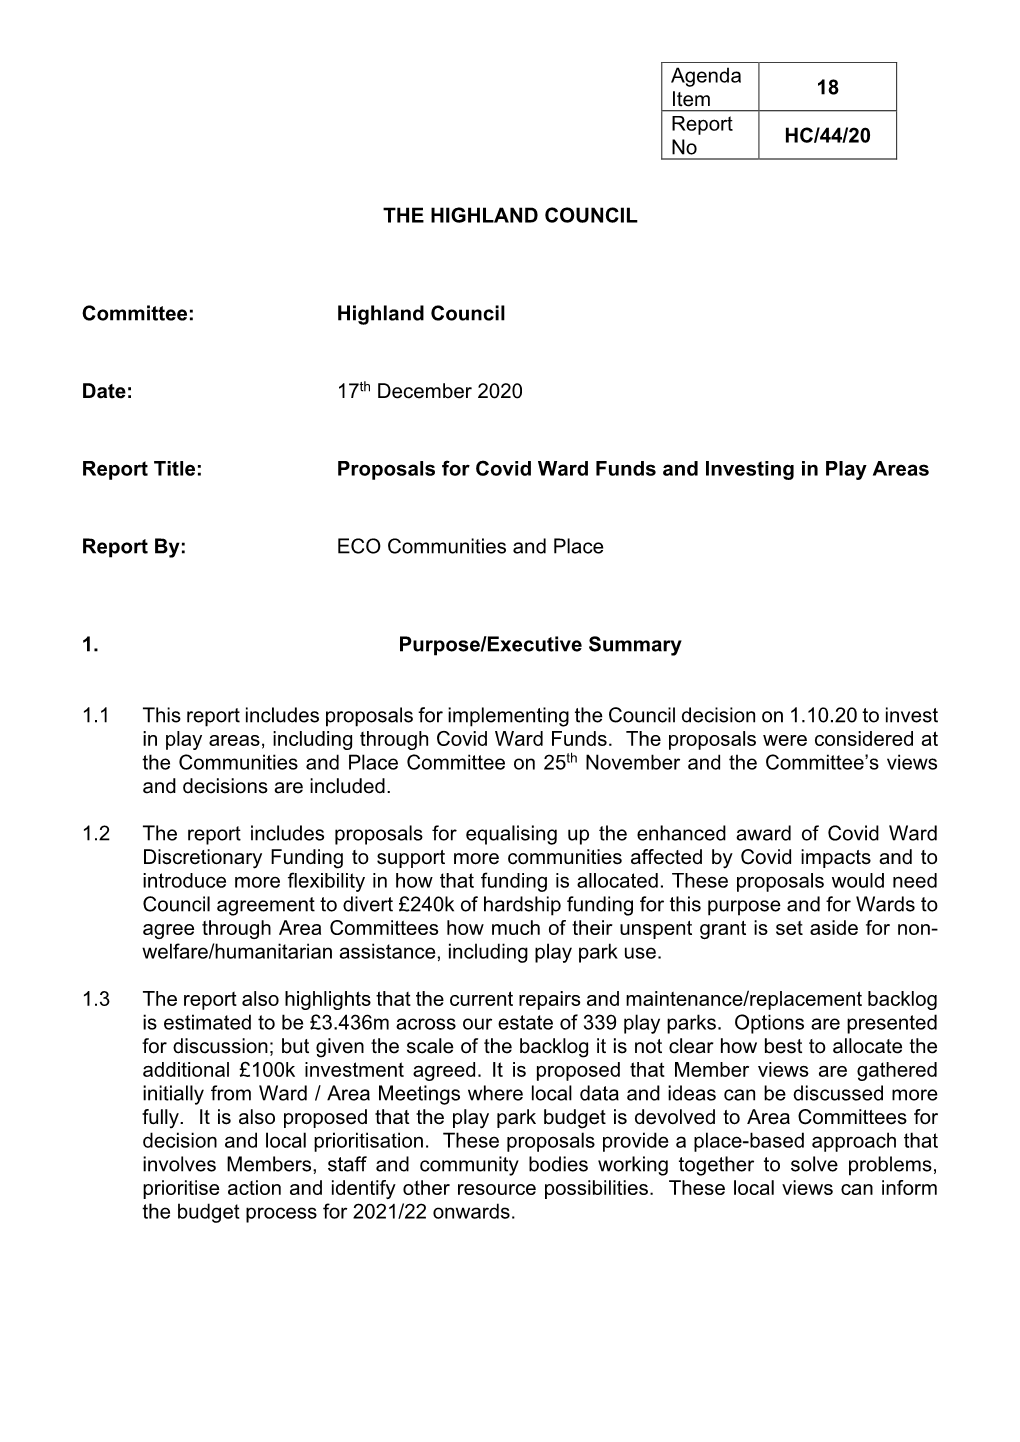 Item 18 Proposals for Covid-19 Ward Funds And